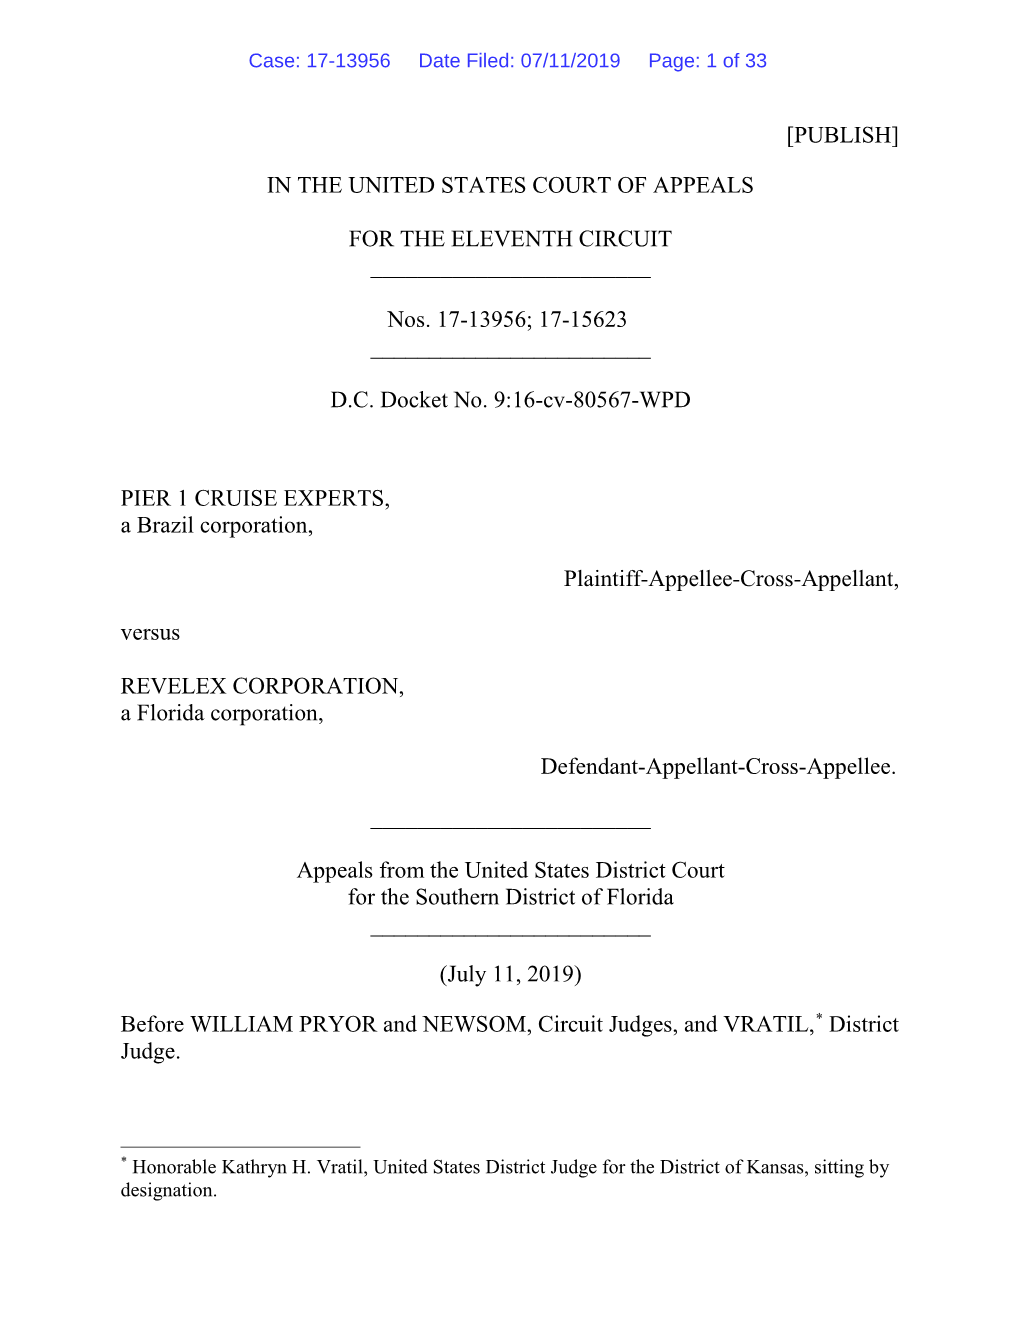 [Publish] in the United States Court of Appeals for The